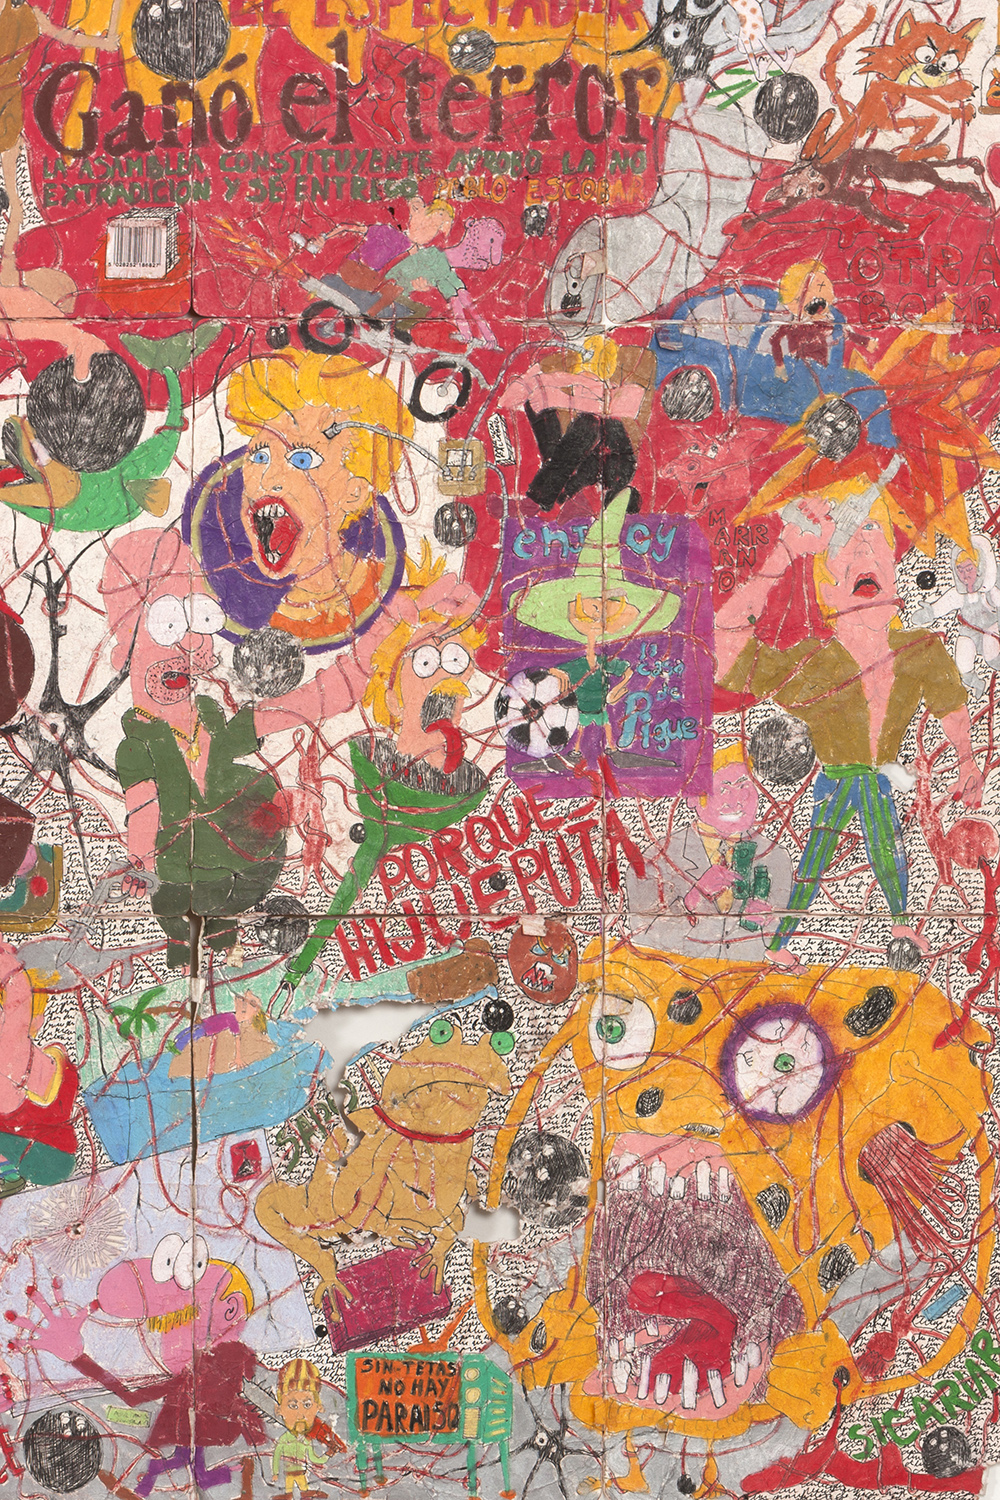 Camilo Restrepo. <em>Bowling for Medellín 3</em>, 2016. Ink, water soluble wax pastel, tape, newspaper clippings, glue, stickers and saliva on paper, 58 1/2 x 106 1/2 inches (148.6 x 270.5 cm) Detail